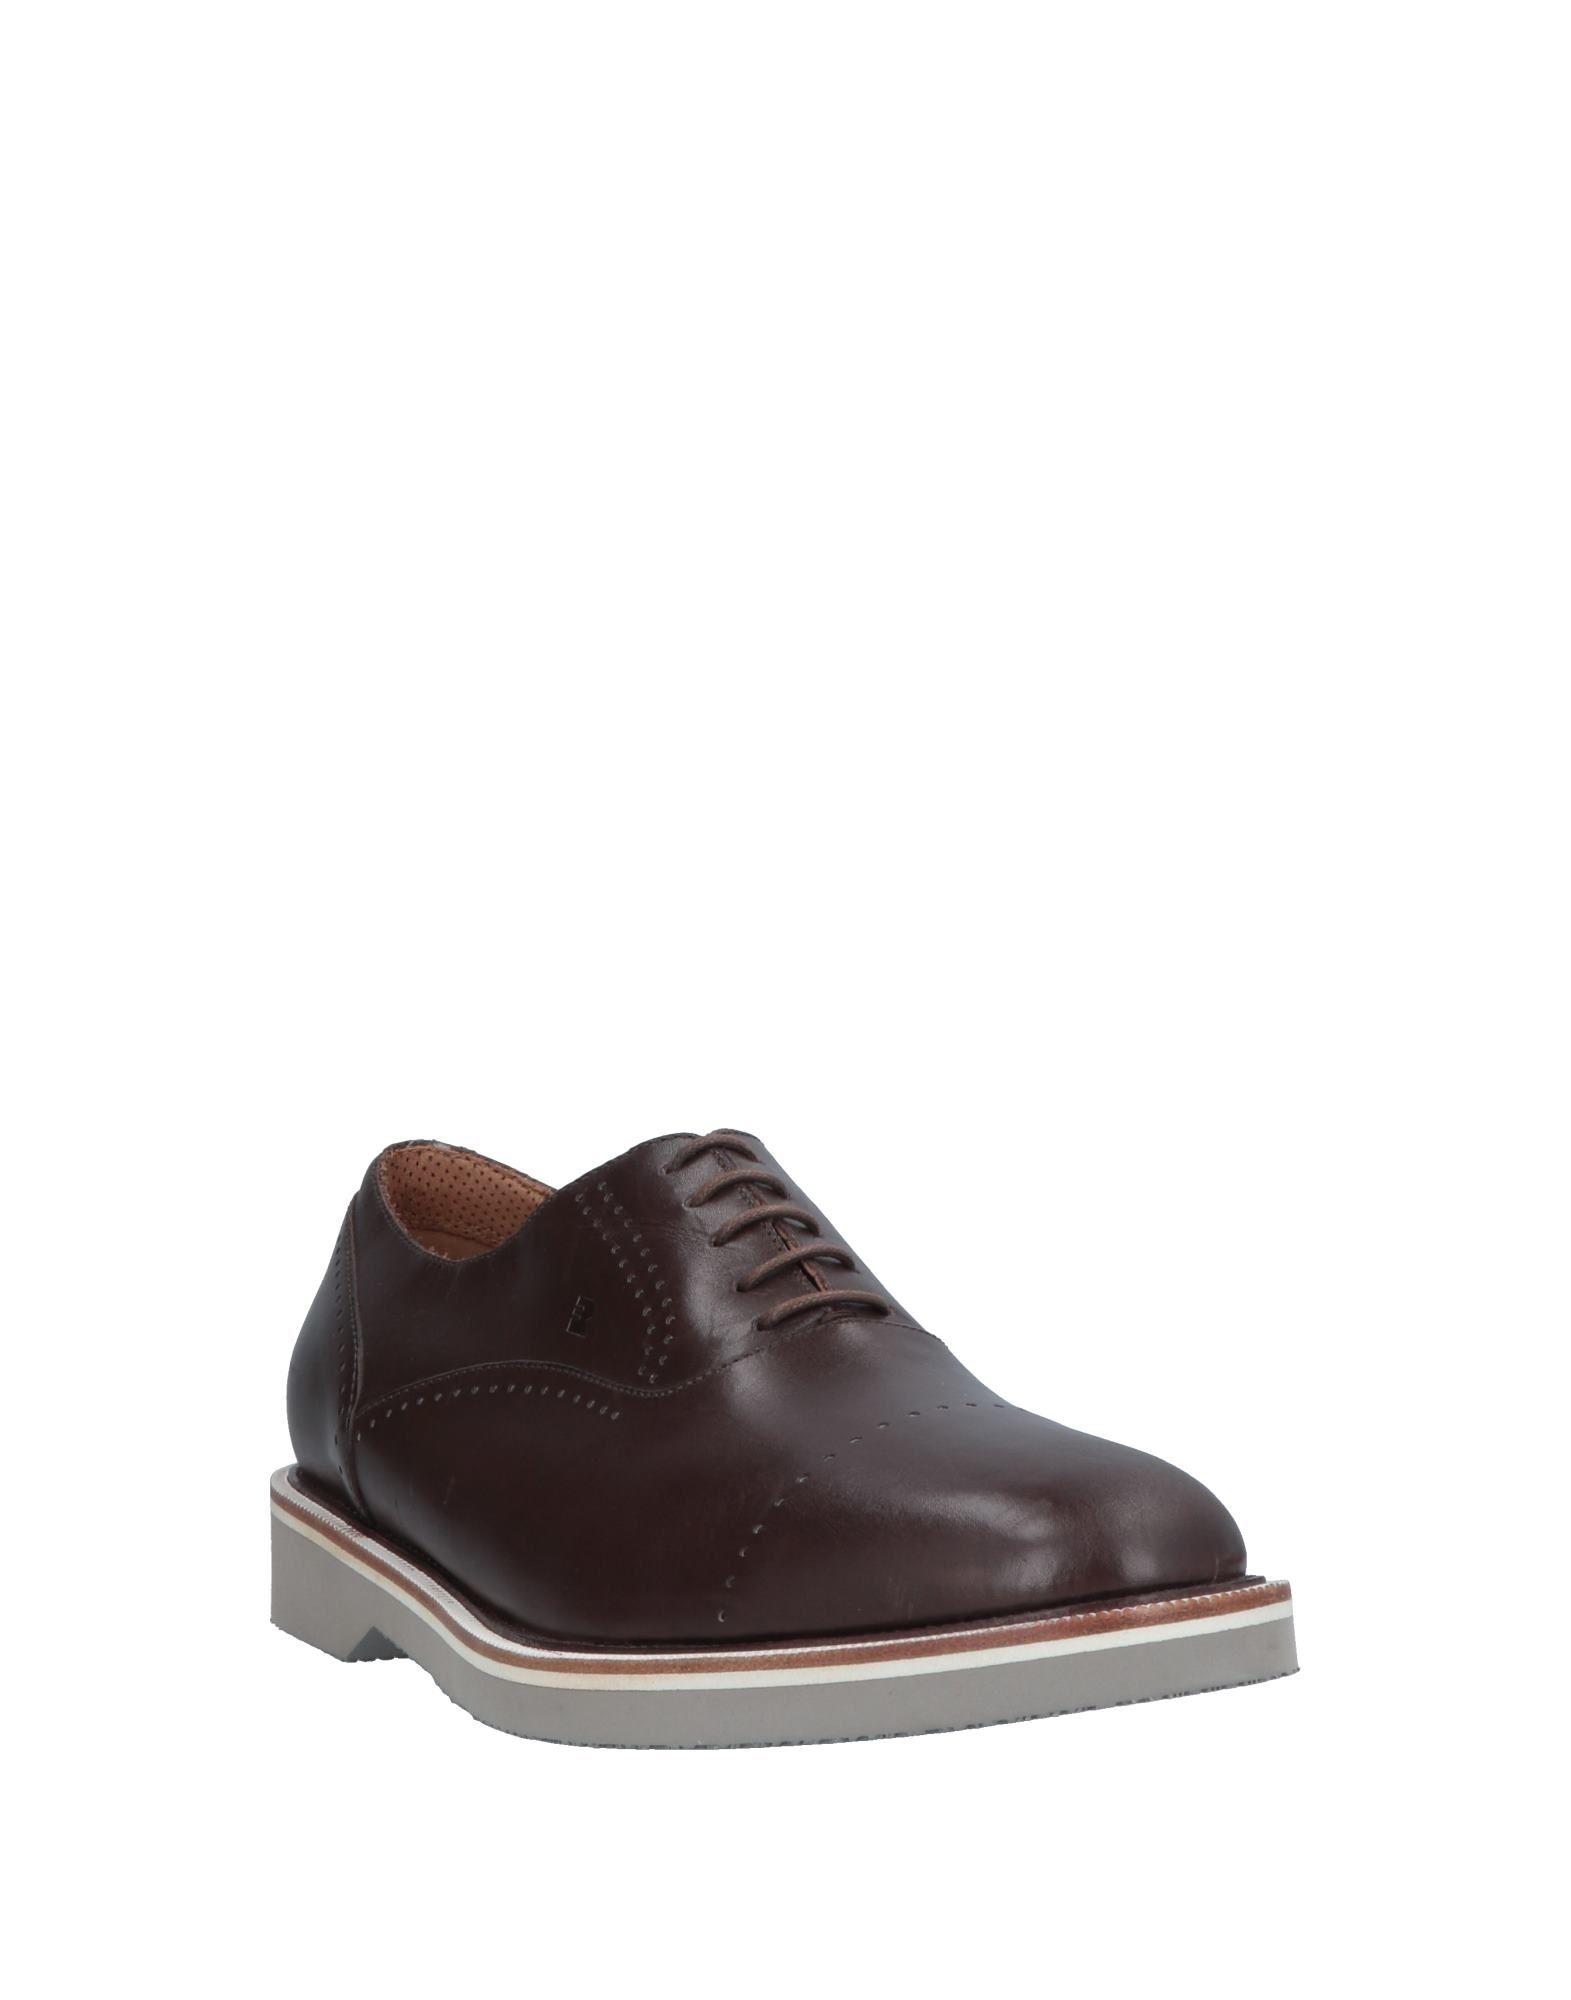 Fratelli Rossetti Leather Lace-up Shoe in Cocoa (Brown) for Men - Lyst